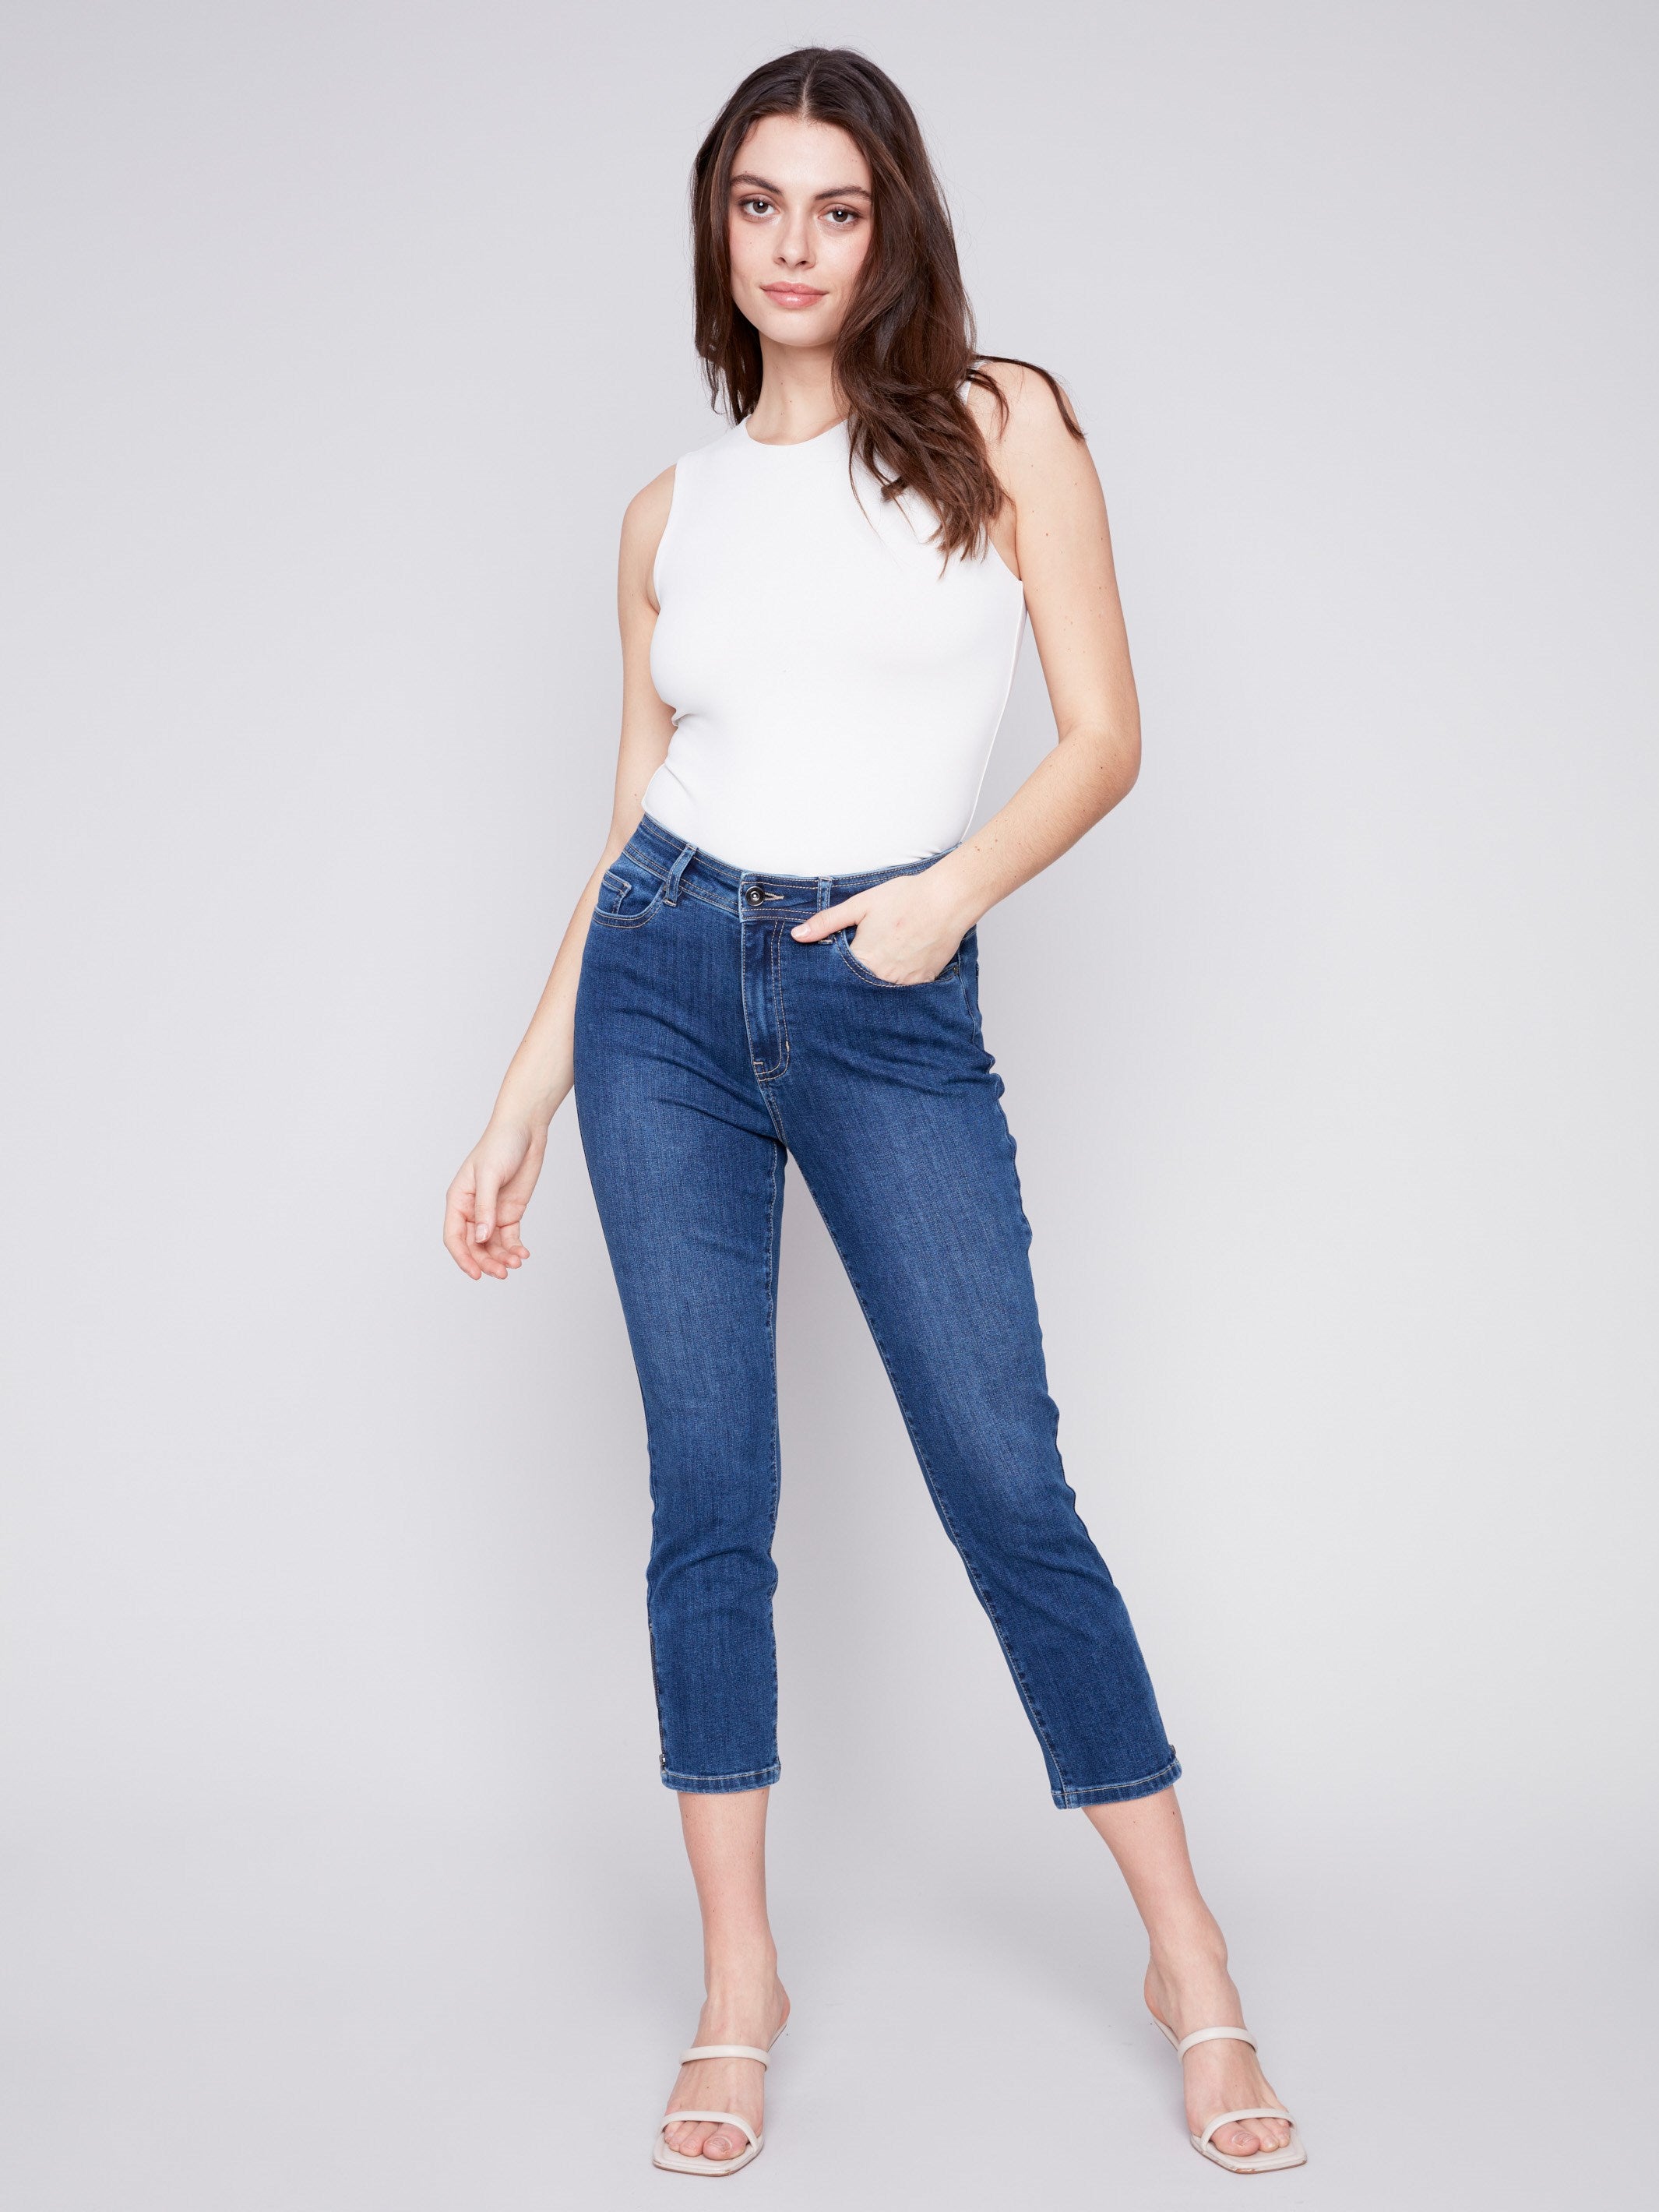 Cropped Jeans with Zipper Detail - Indigo - Charlie B Collection Canada - Image 1